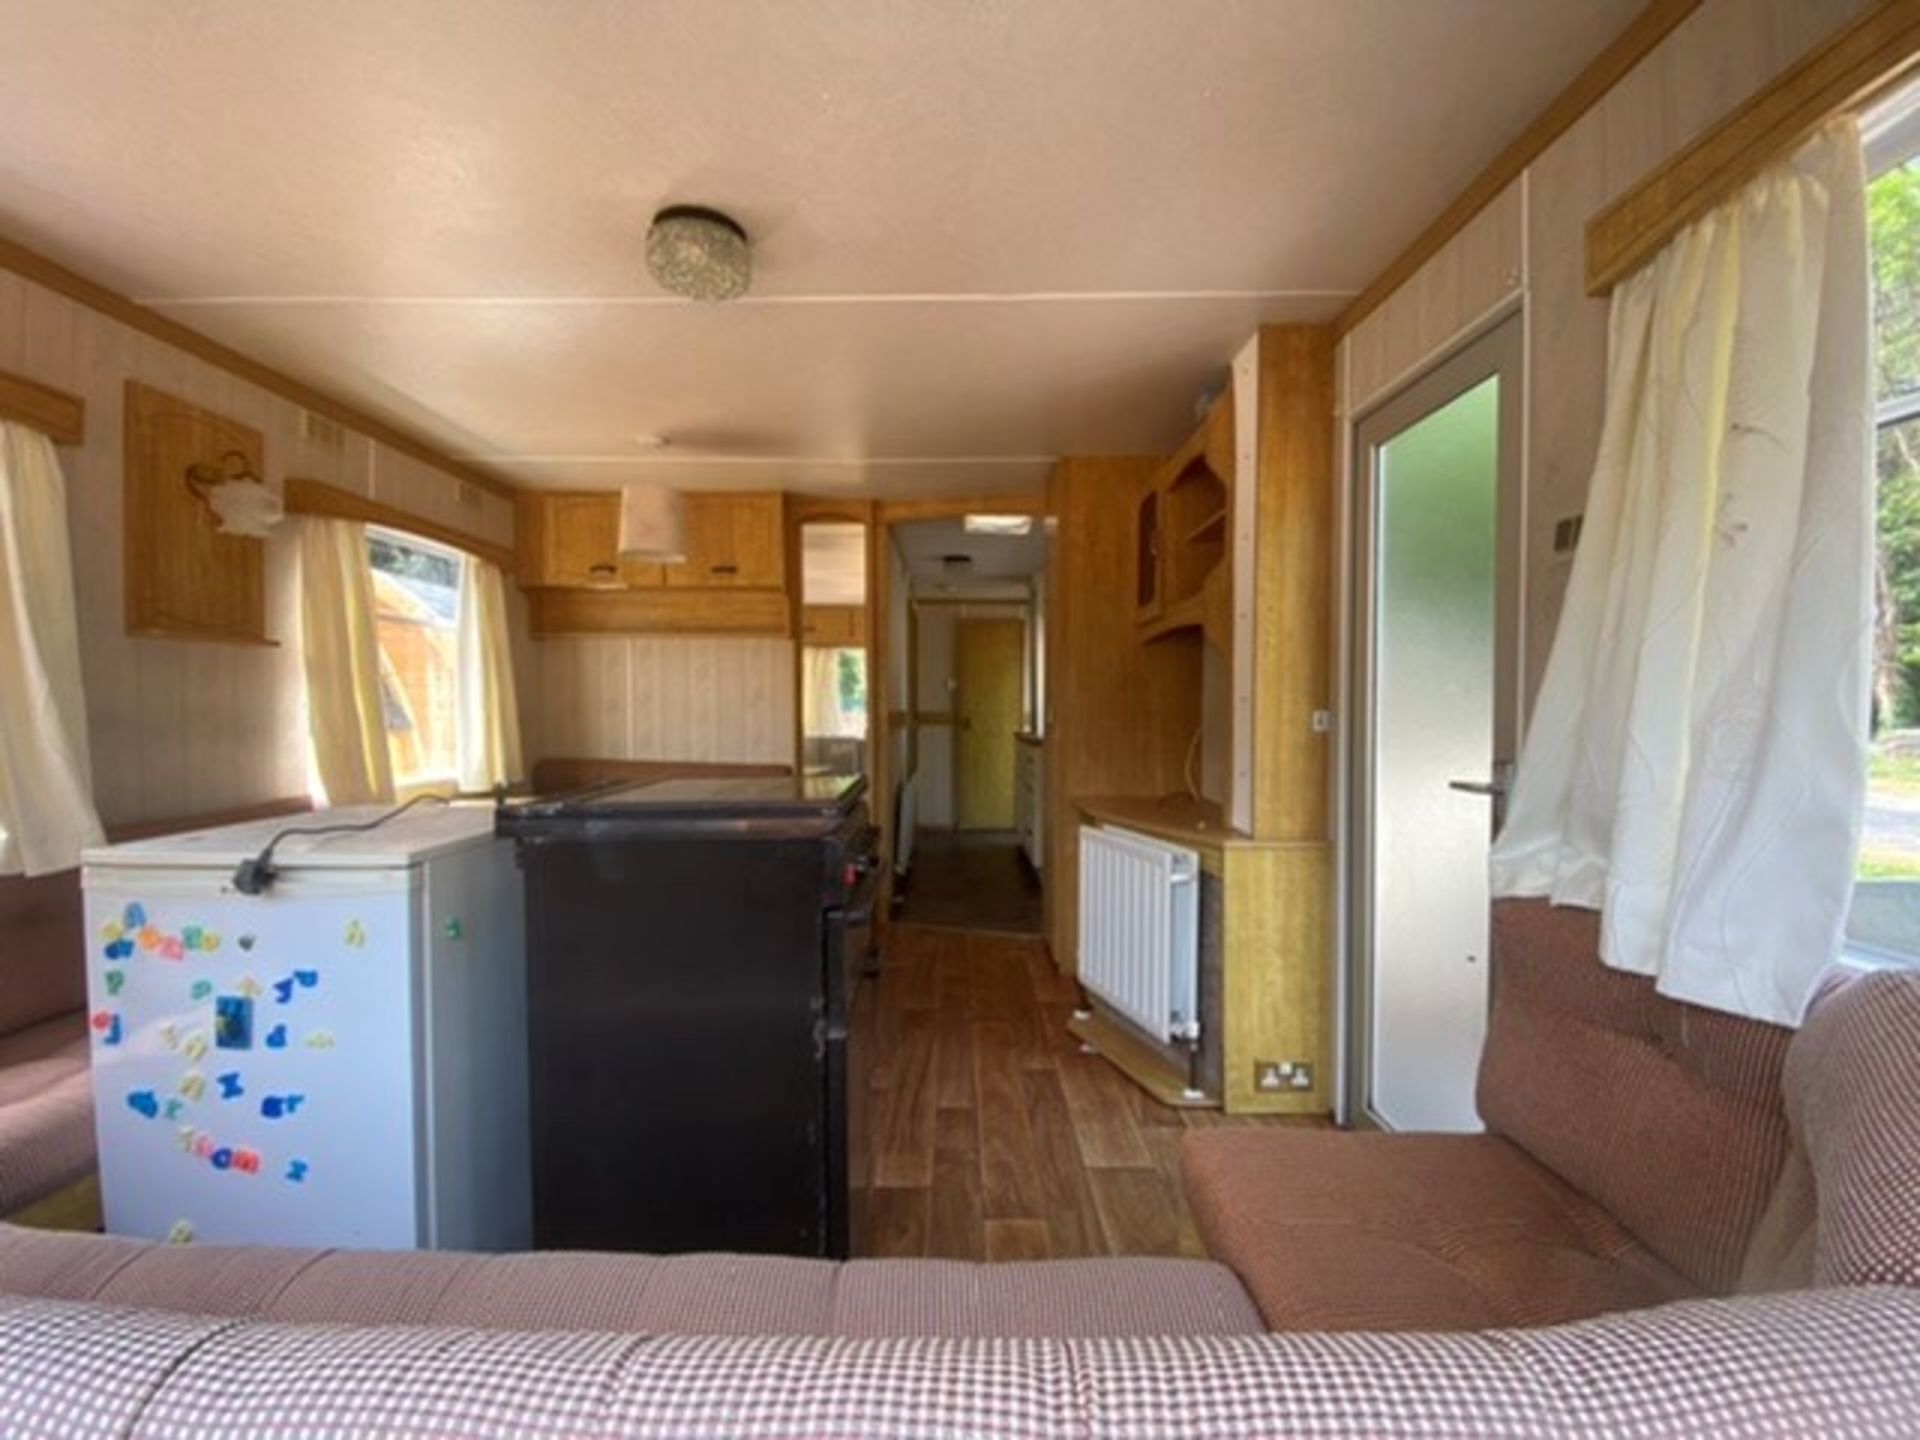 30x 10 GALAXY 2 BEDROOM STATIC CARAVAN WITH NEW GAS FIRED CENTRAL HEATING - Image 5 of 9